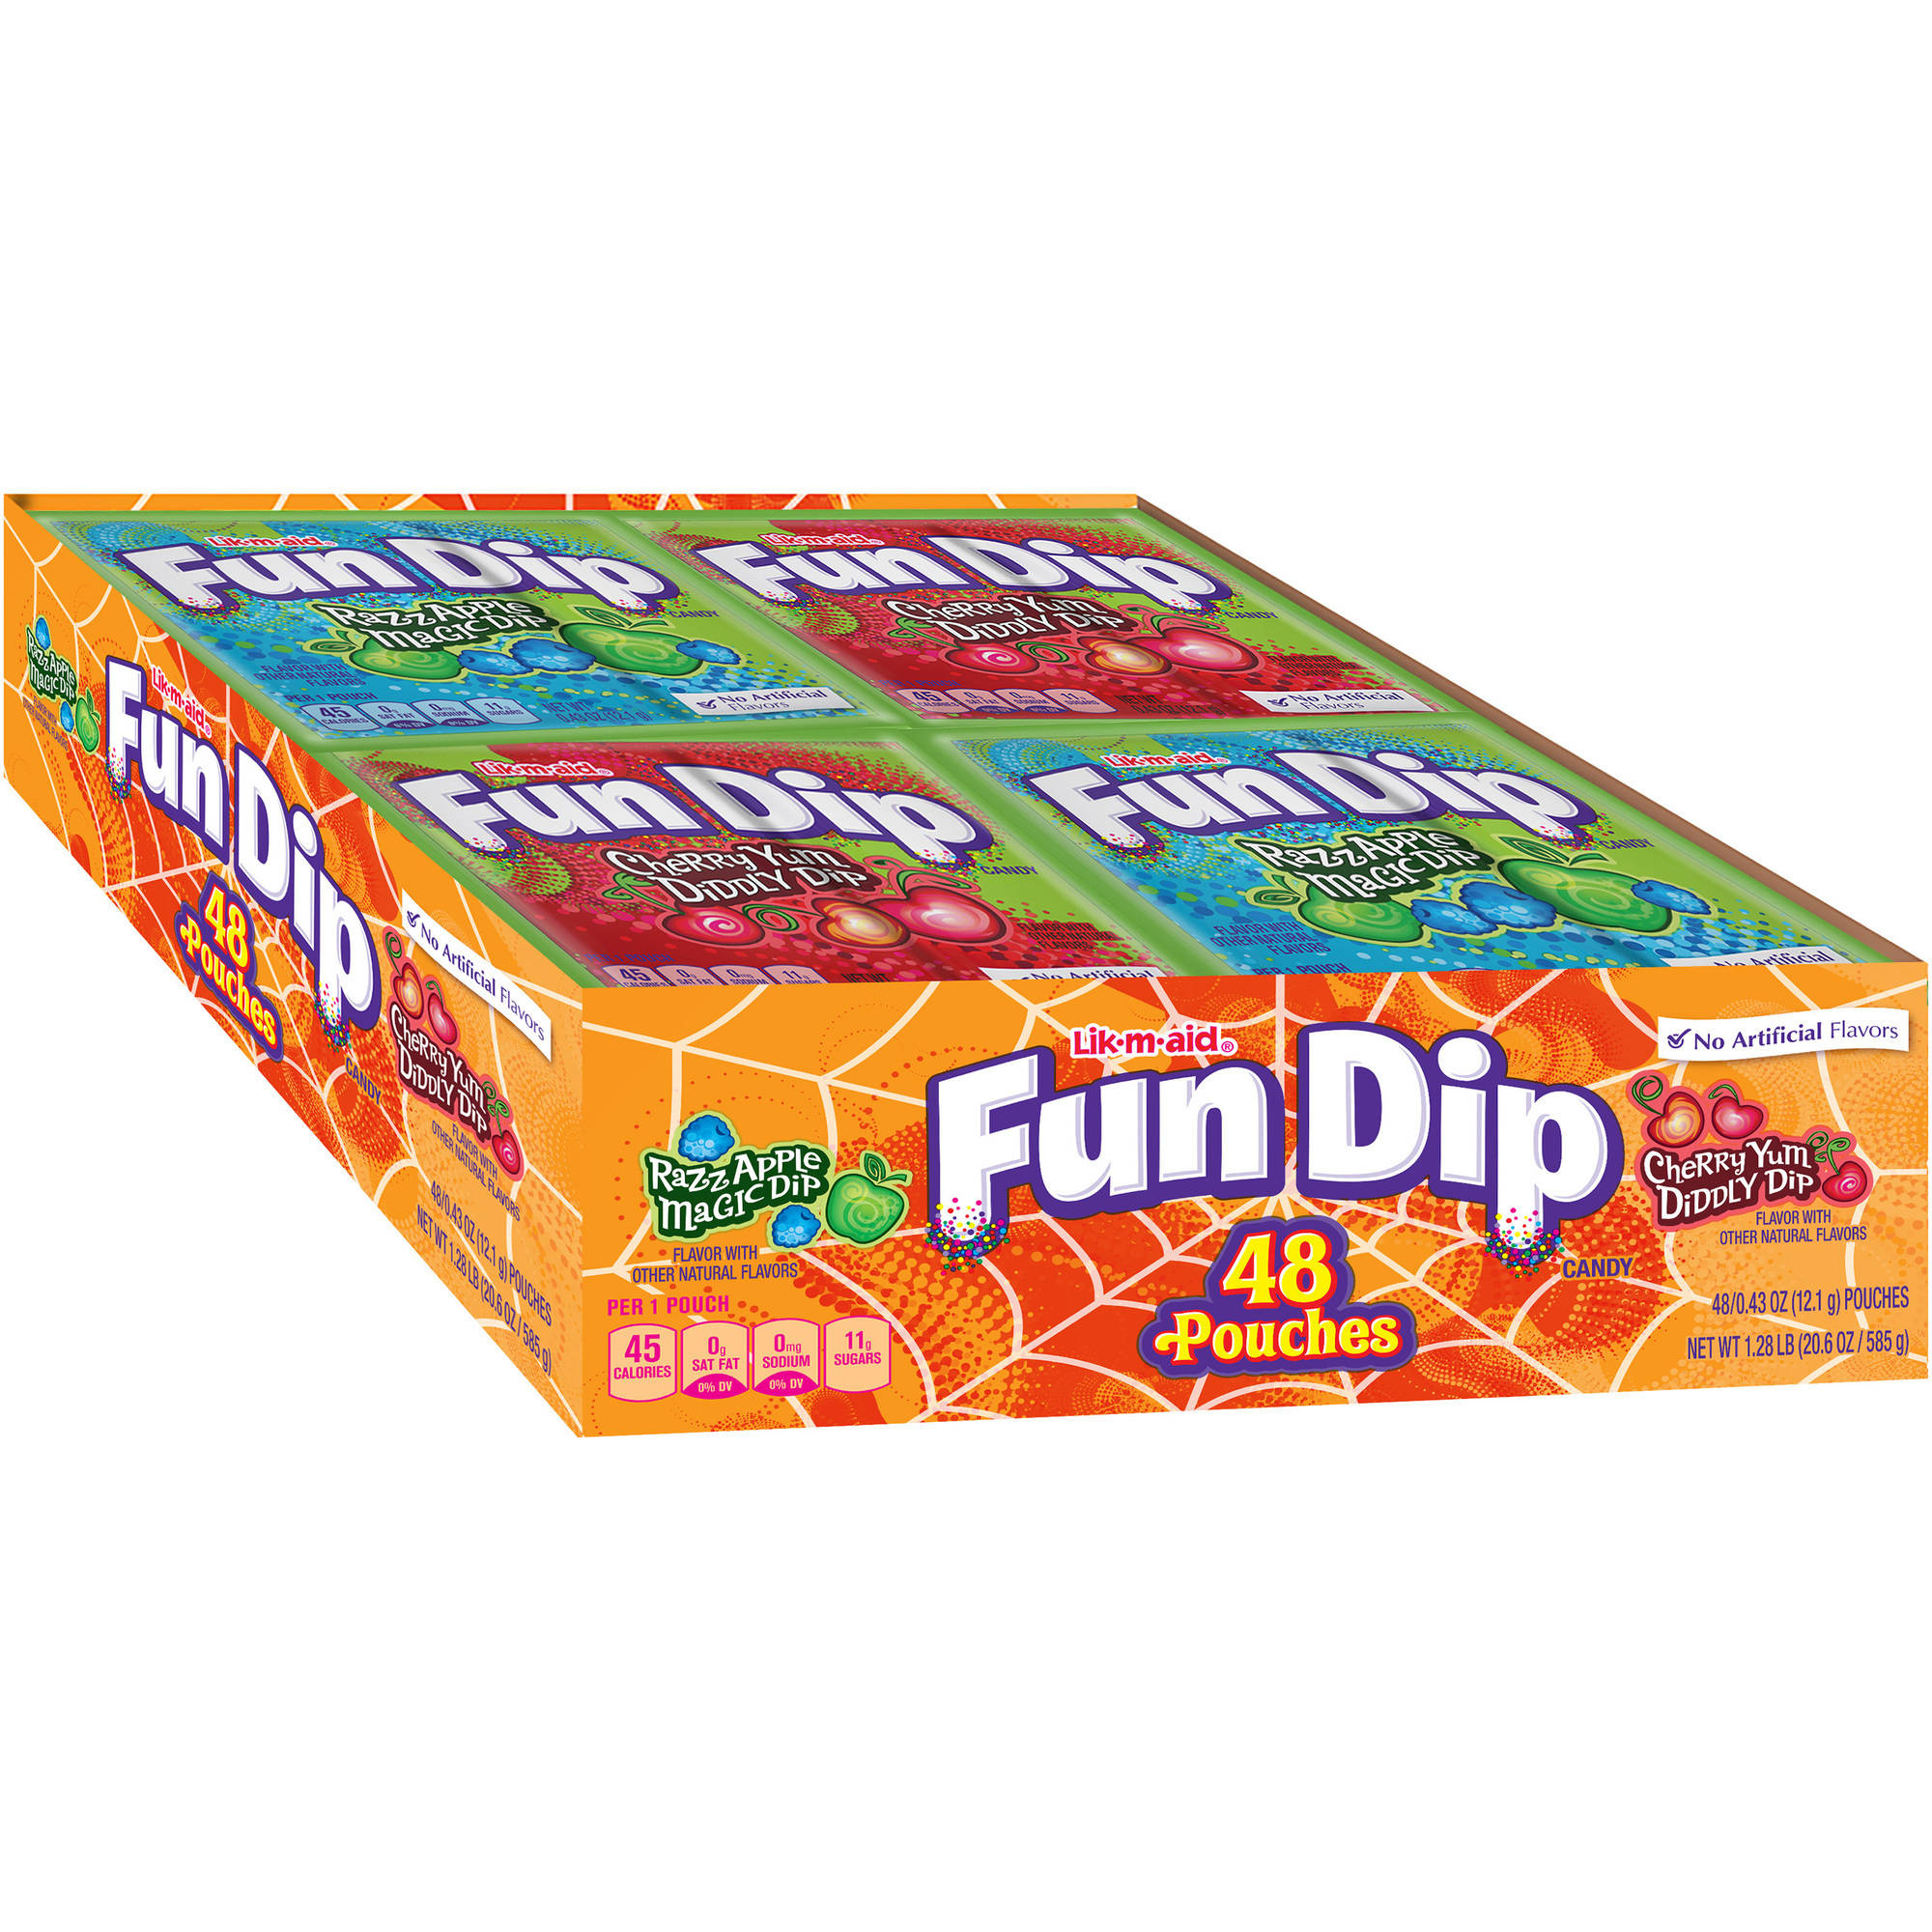 Fun Dip Assorted Candy Pouches (48 Count) Only $4.88 at Walmart! (Perfect to Hand Out This Halloween!)